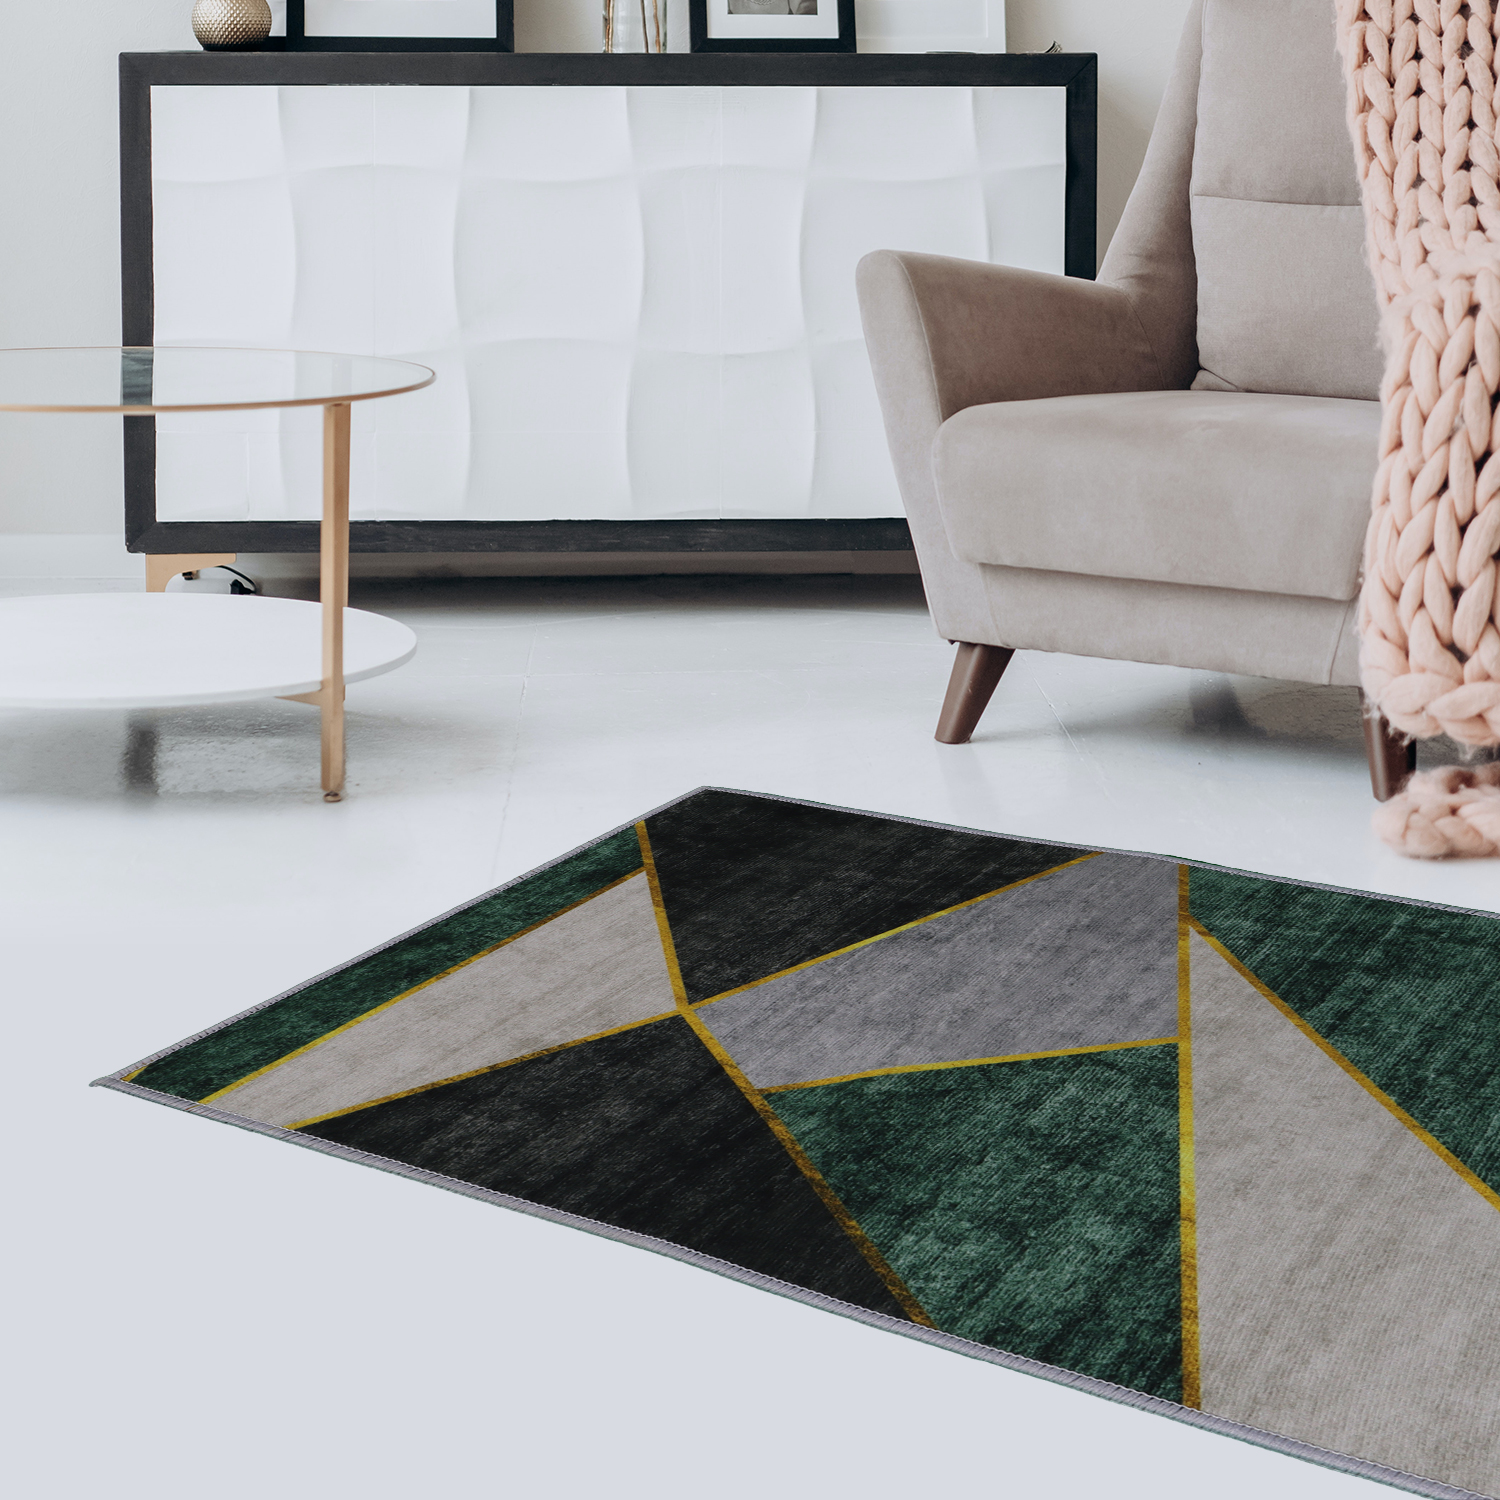 Casual Geometric Cotton Area Rug，Modern Abstract Geometric Shapes Accent Outdoor Rug 4ft x 5.3ft for Patio Bedrooms, Dining Rooms, Living Rooms Light Grey /Green-CASAINC